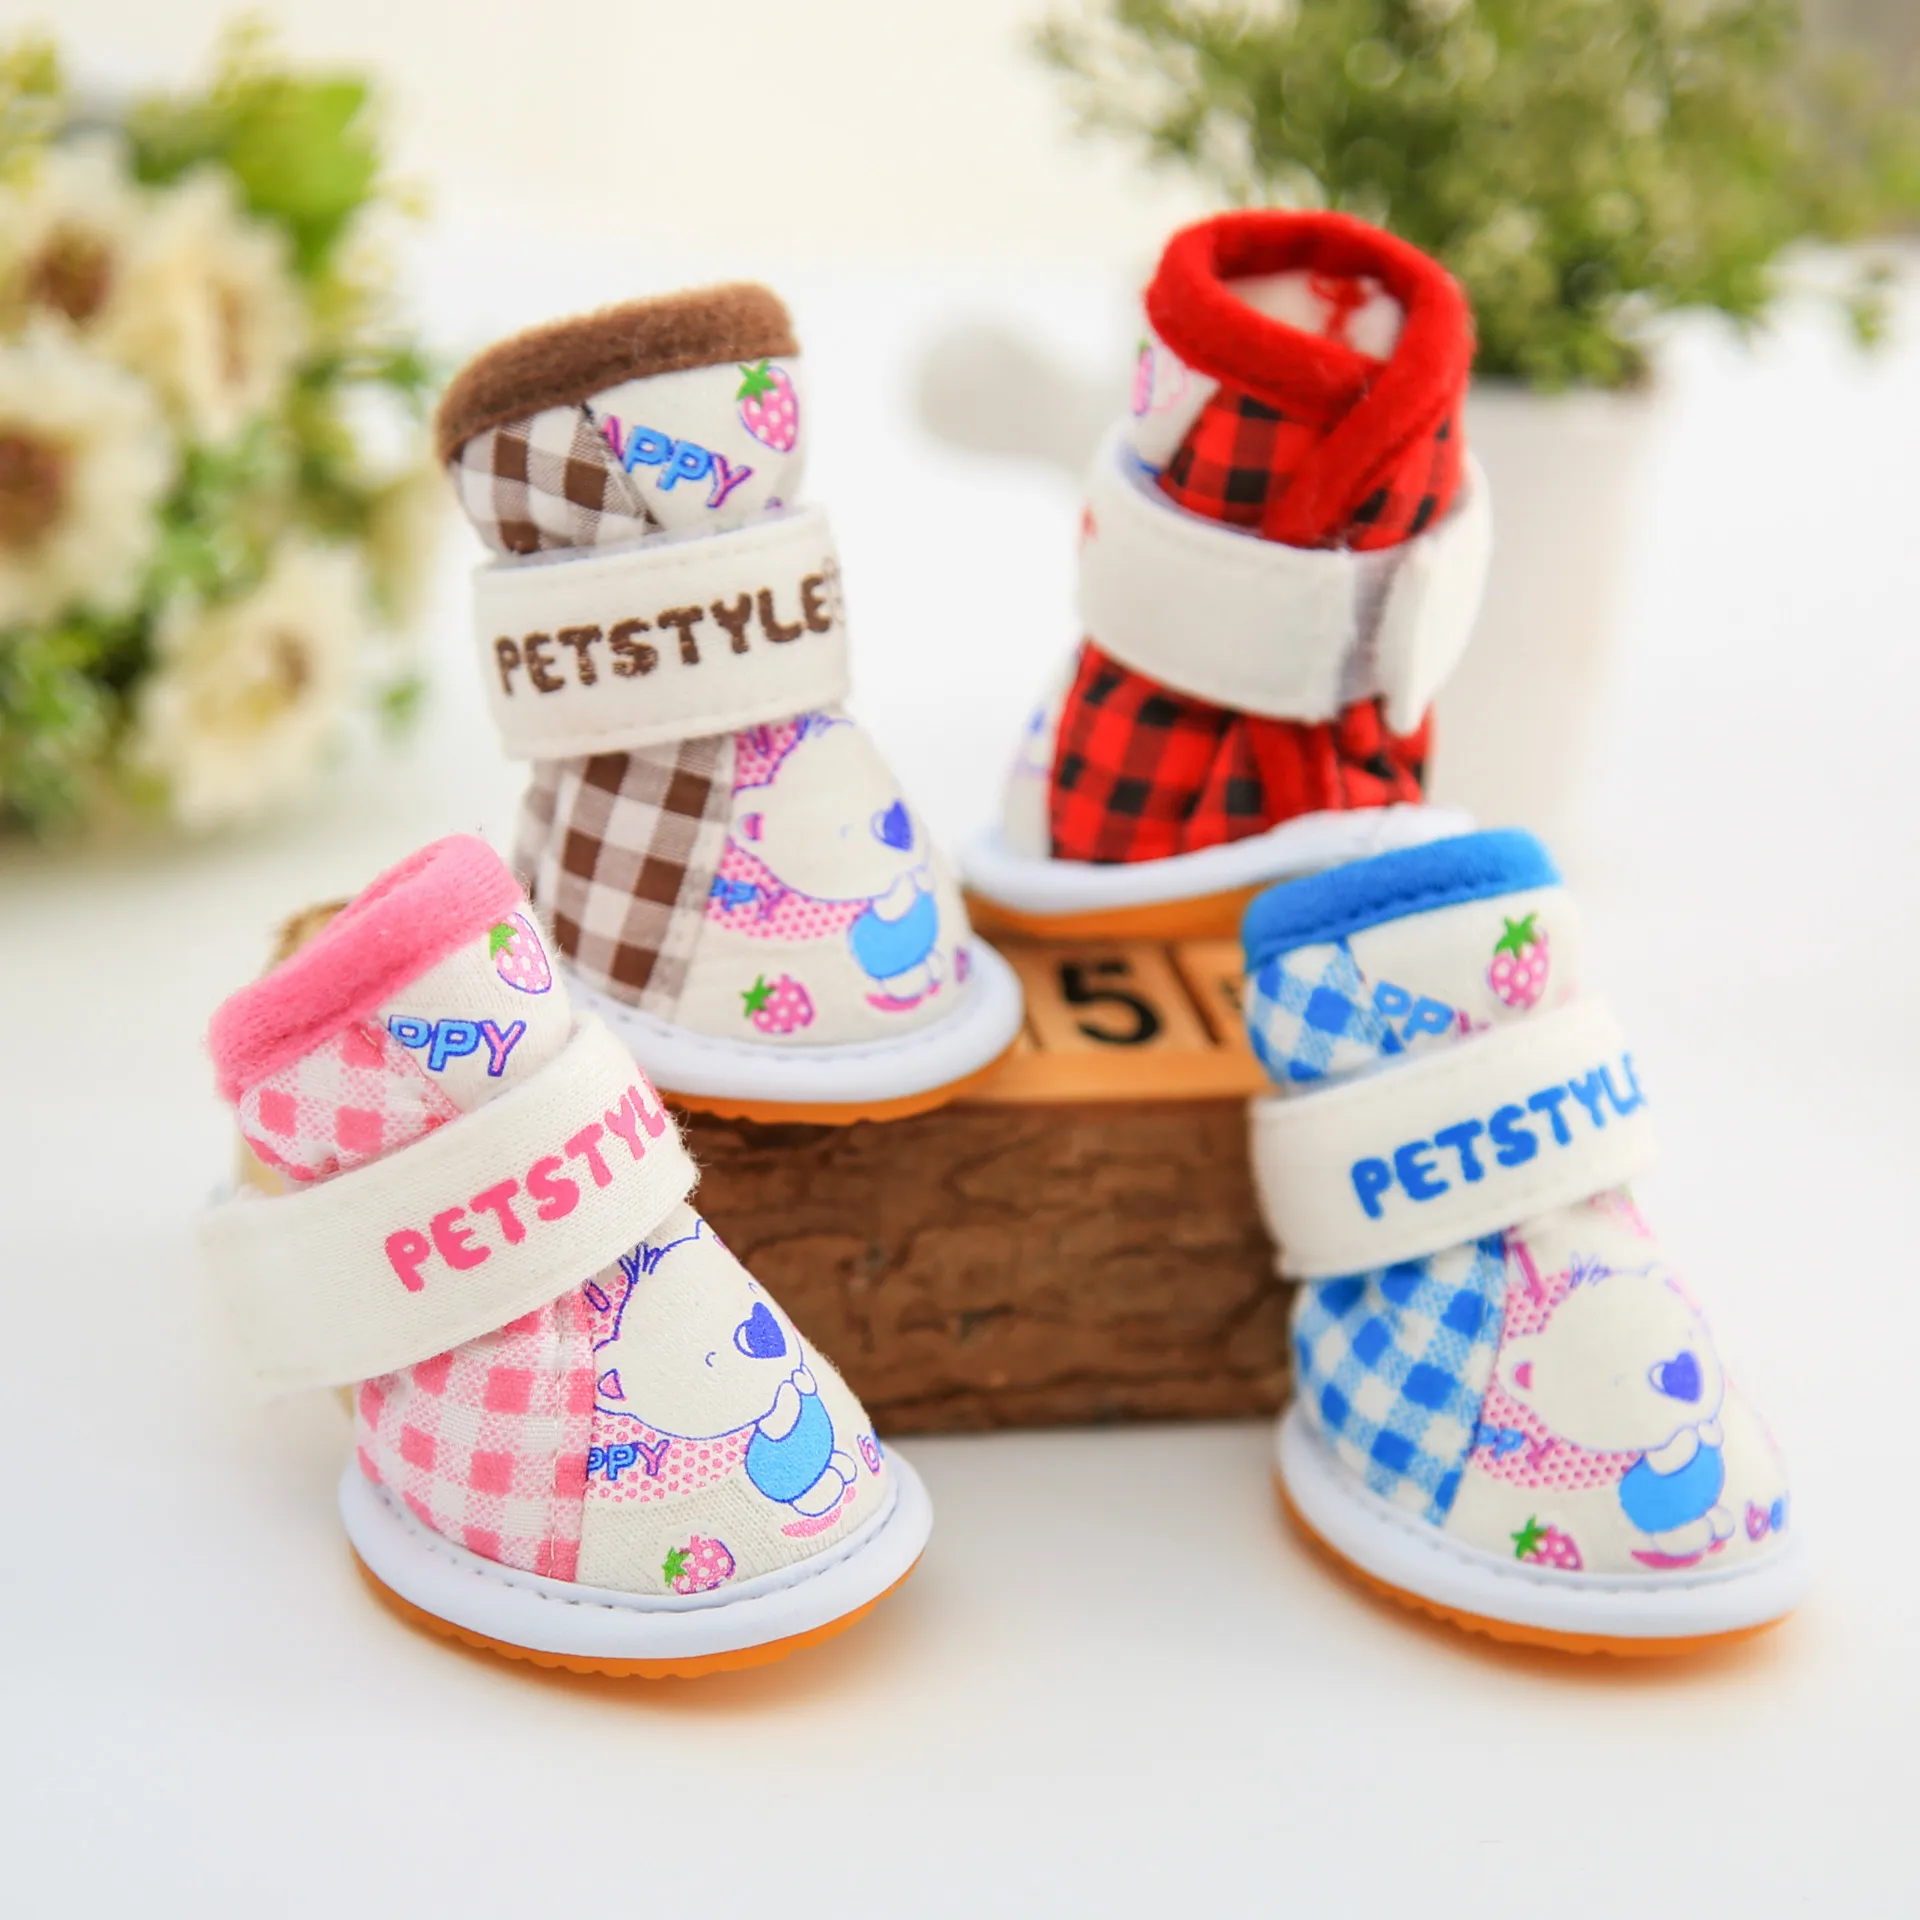 Pet Shoes Plaid Bear Dog Boots Shoes Yorkie Maltese Chiwawa Dog Shoes Puppy Pet Shoes Clothing For Dogs Cat Clothes 4 PIECES/SET